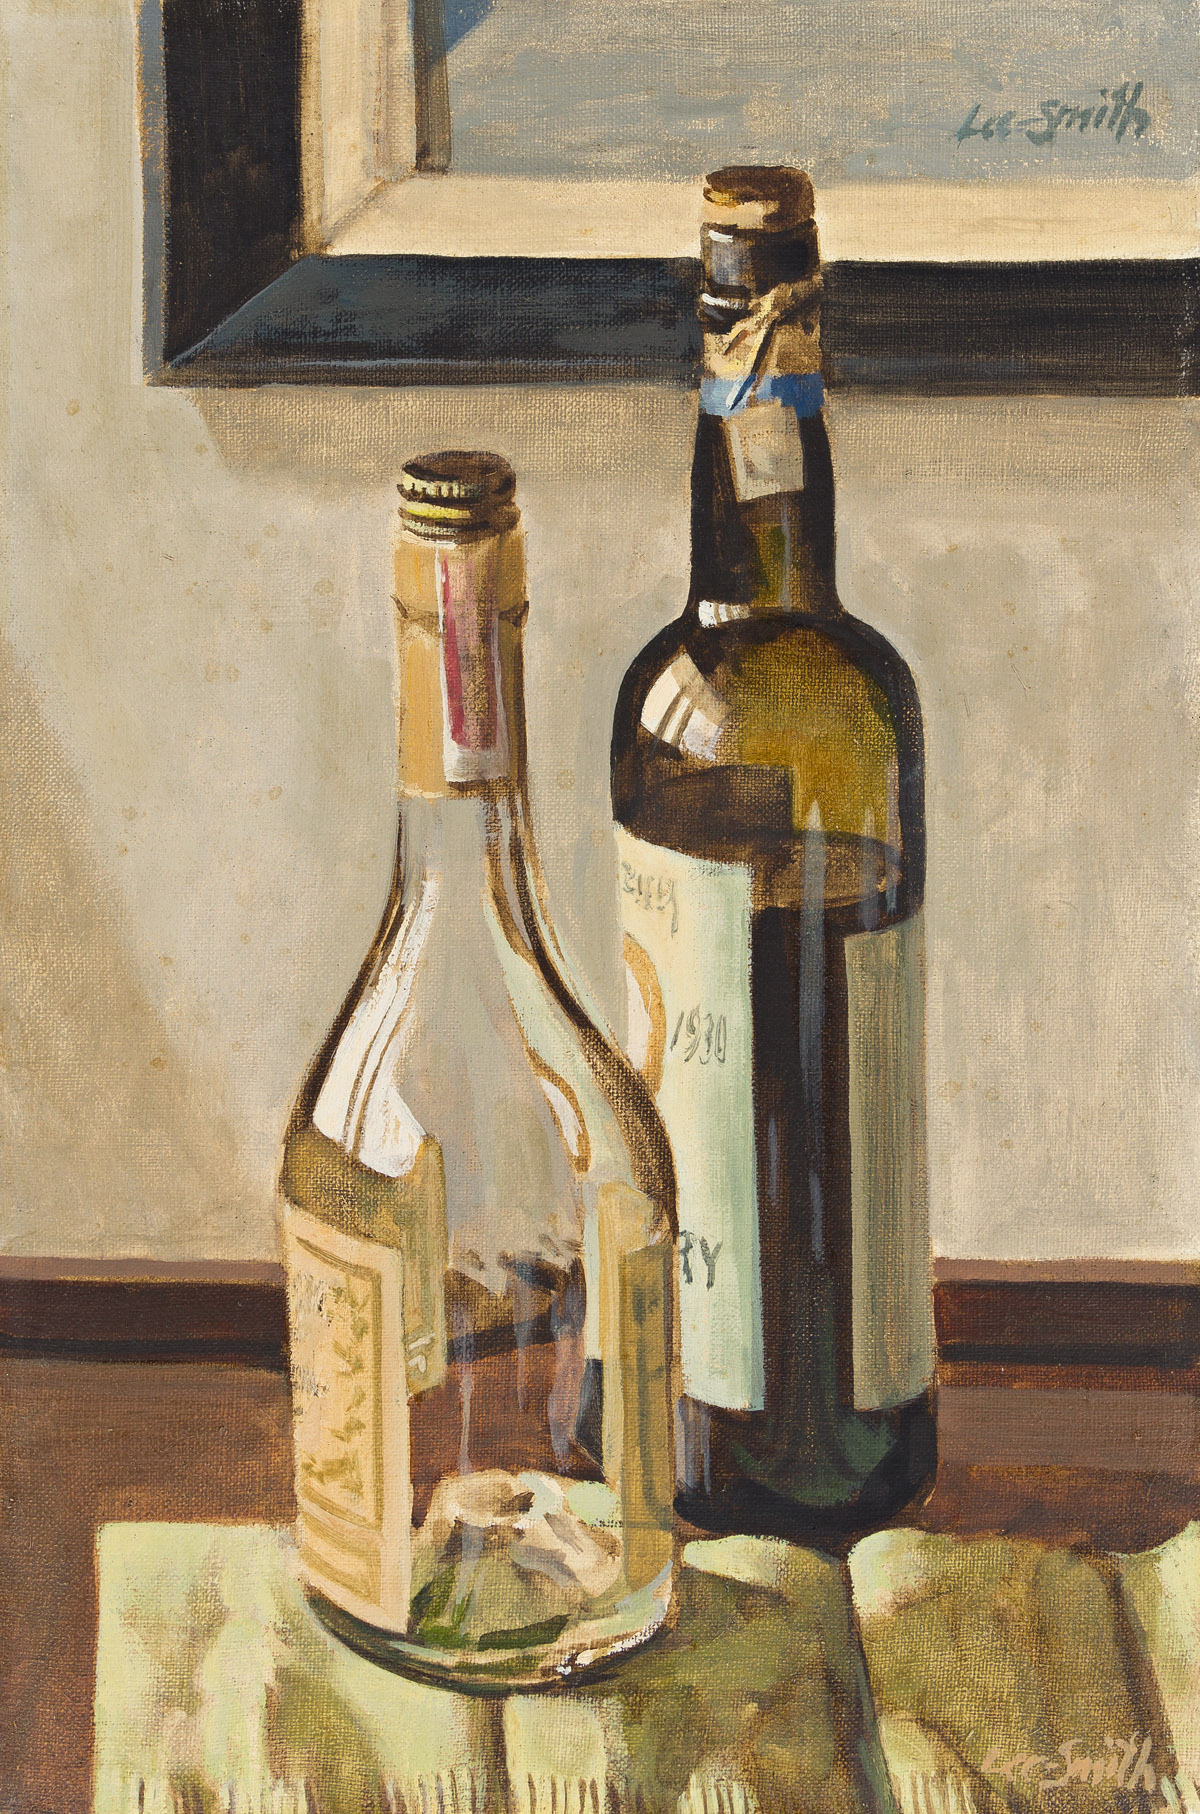 HUGHIE LEE-SMITH (1915 - 1999) Untitled (Still Life with Two Wine Bottles).